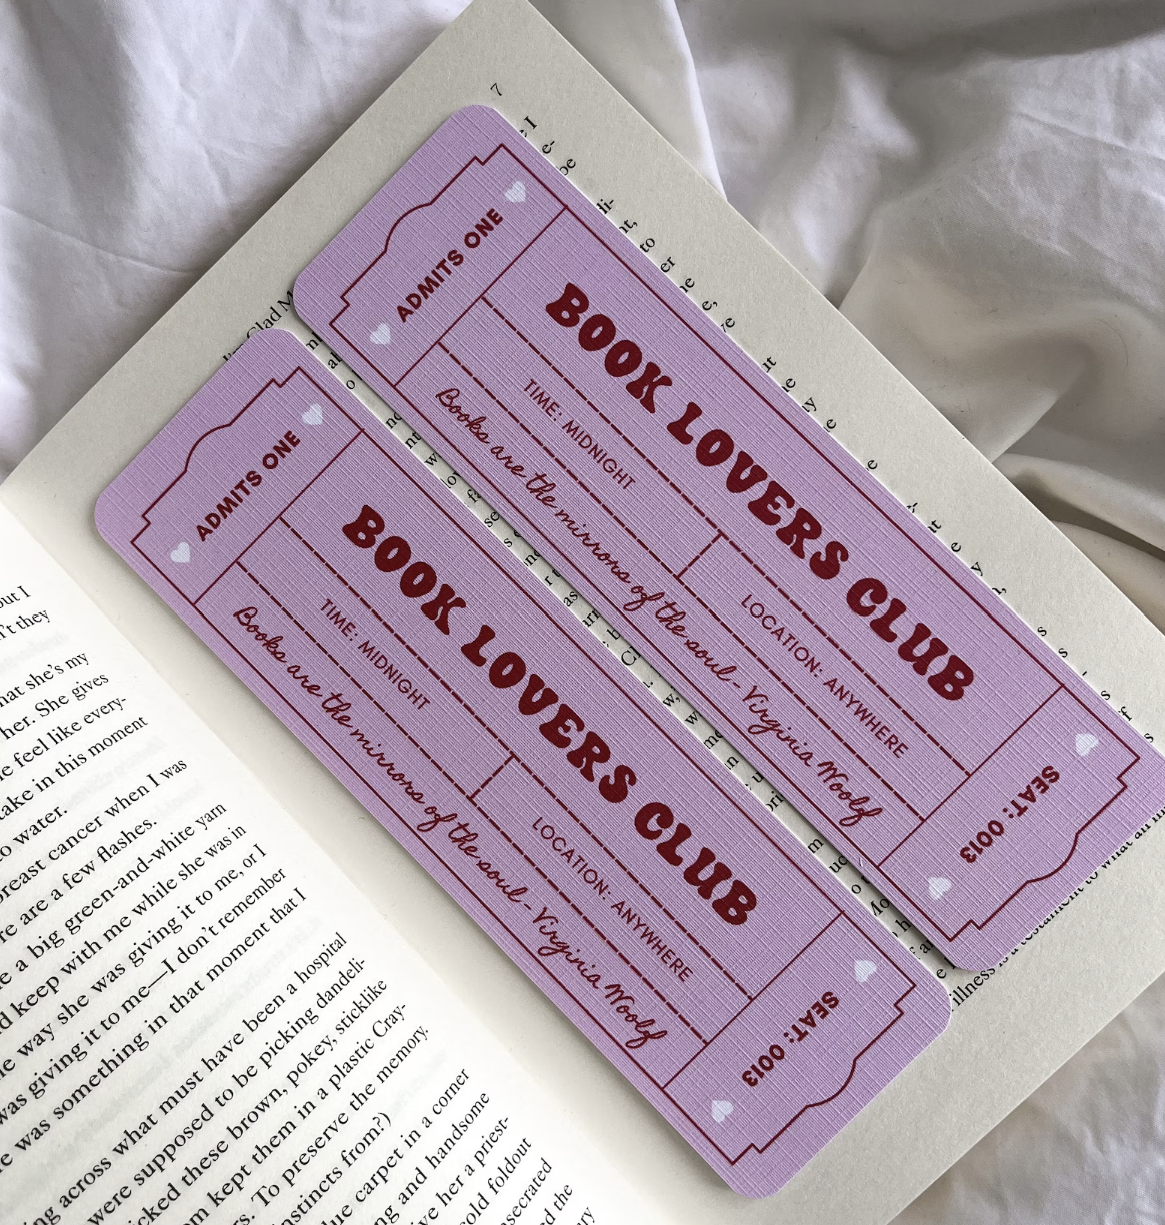 Pastel pink bookmarks designed to look like a carnival ticket with "admit one" on the sides that reads "Book Lovers Club" in red bubble font and features a quote from Virginia Woolf.